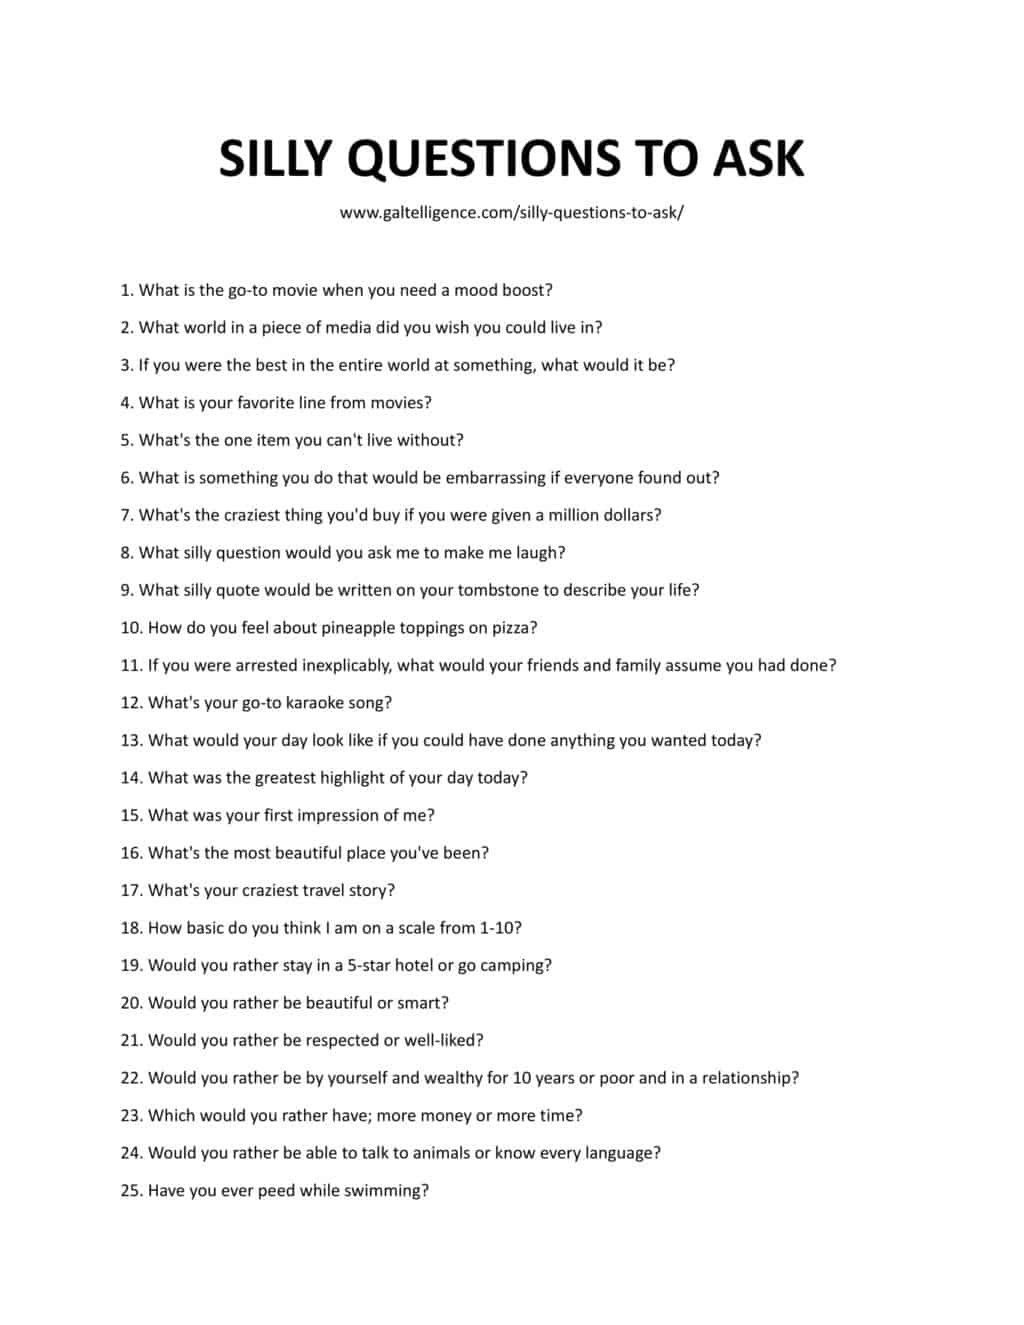 Downloadable and Printable List of Questions